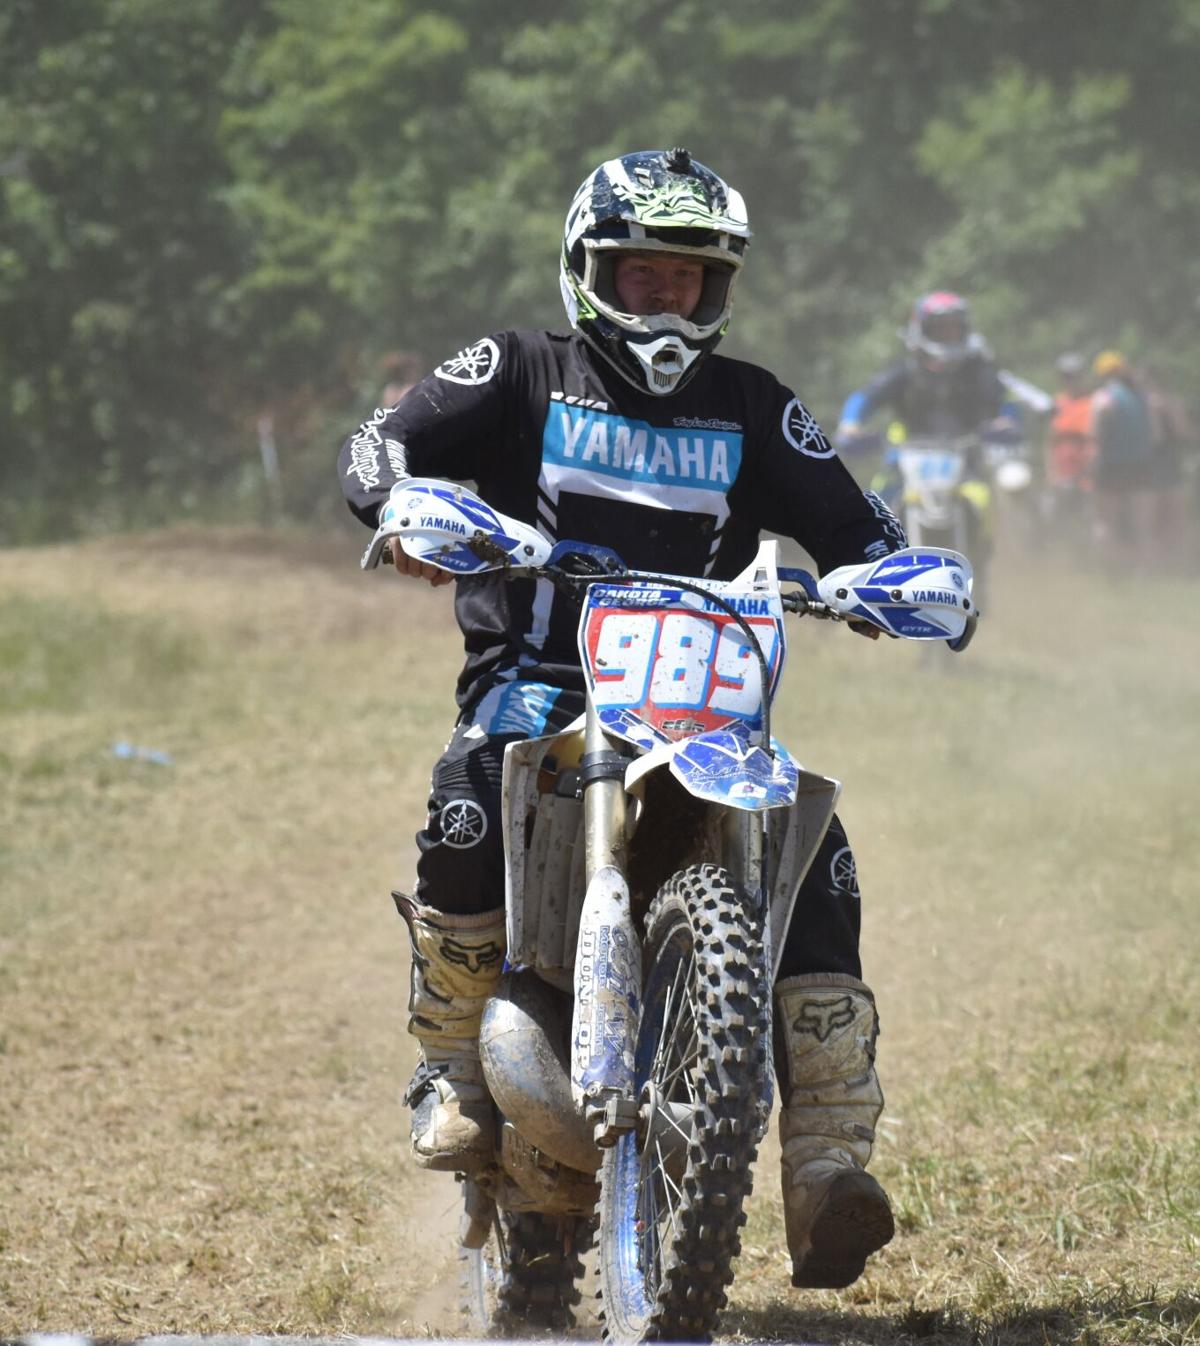 Racers ride on at Mountain State Hare Scramble dirt bike and ATV series ...